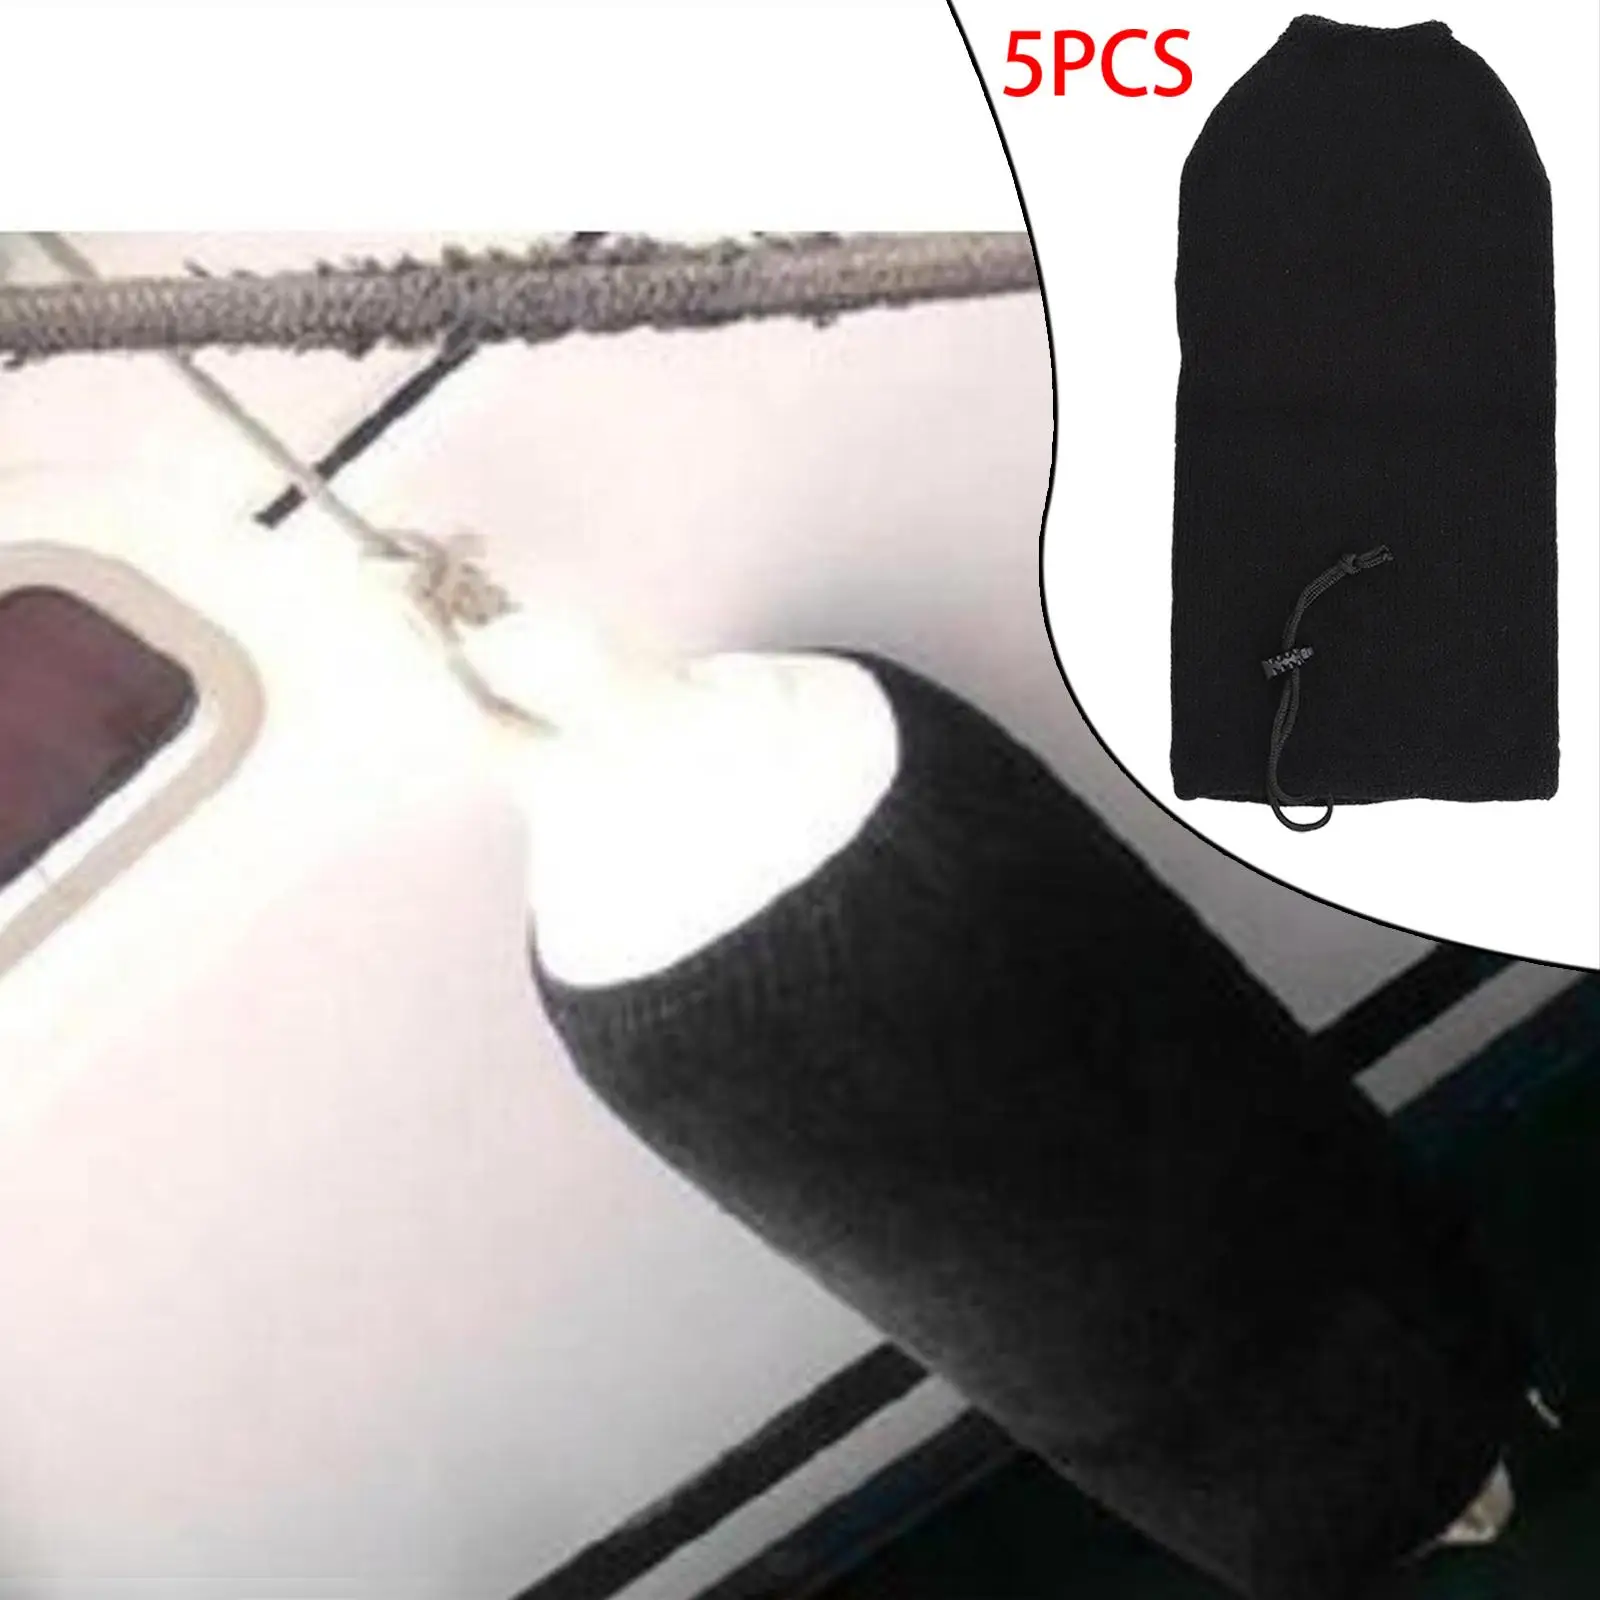 5 Cover, Soft Acrylic Ball Sleeve Anti Collision Woven Windscreen Supplies Protector Fit for Marine Yacht Salt Protection